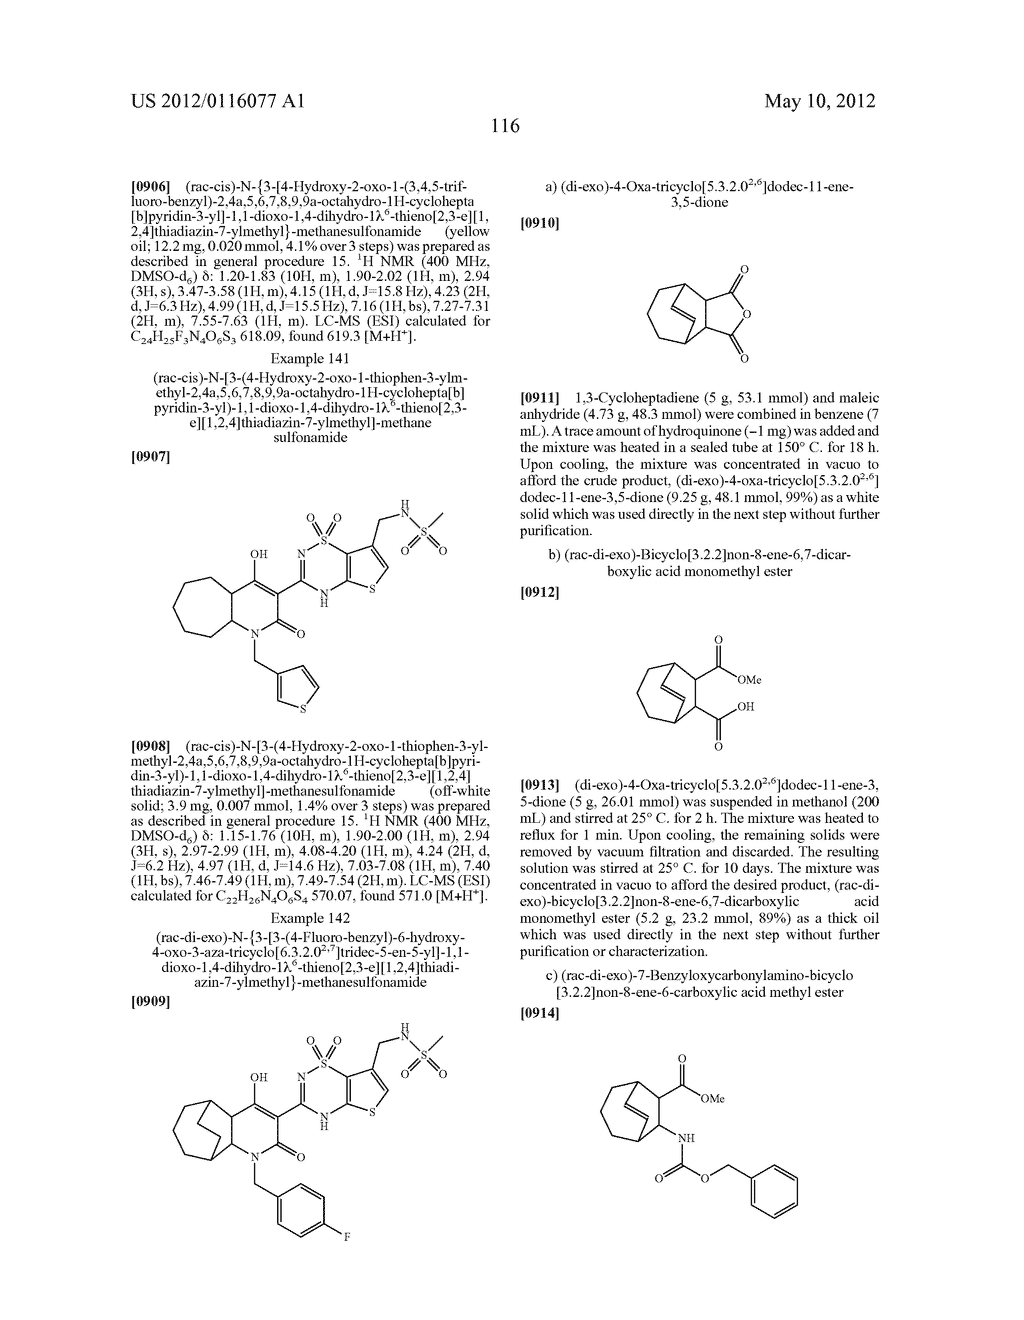 [1,2,4]THIADIAZIN-3-YL ACETIC ACID COMPOUND[[S]] AND METHODS OF MAKING THE     ACETIC ACID COMPOUND - diagram, schematic, and image 117